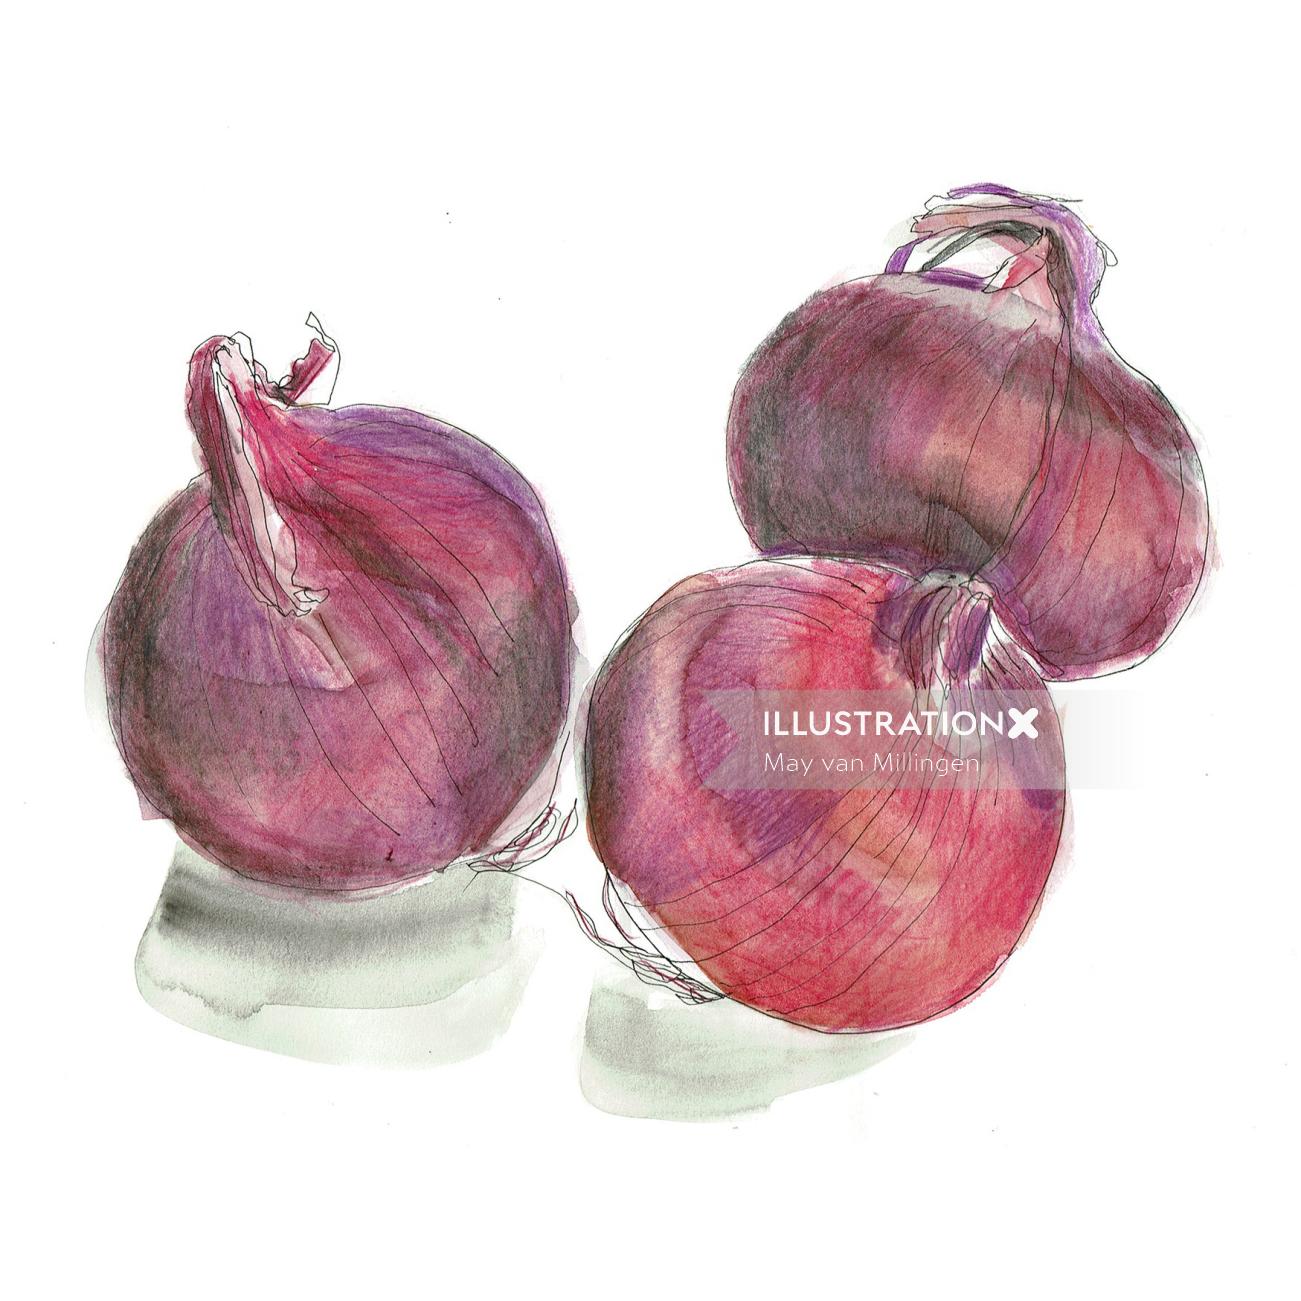 Food Red Onions
